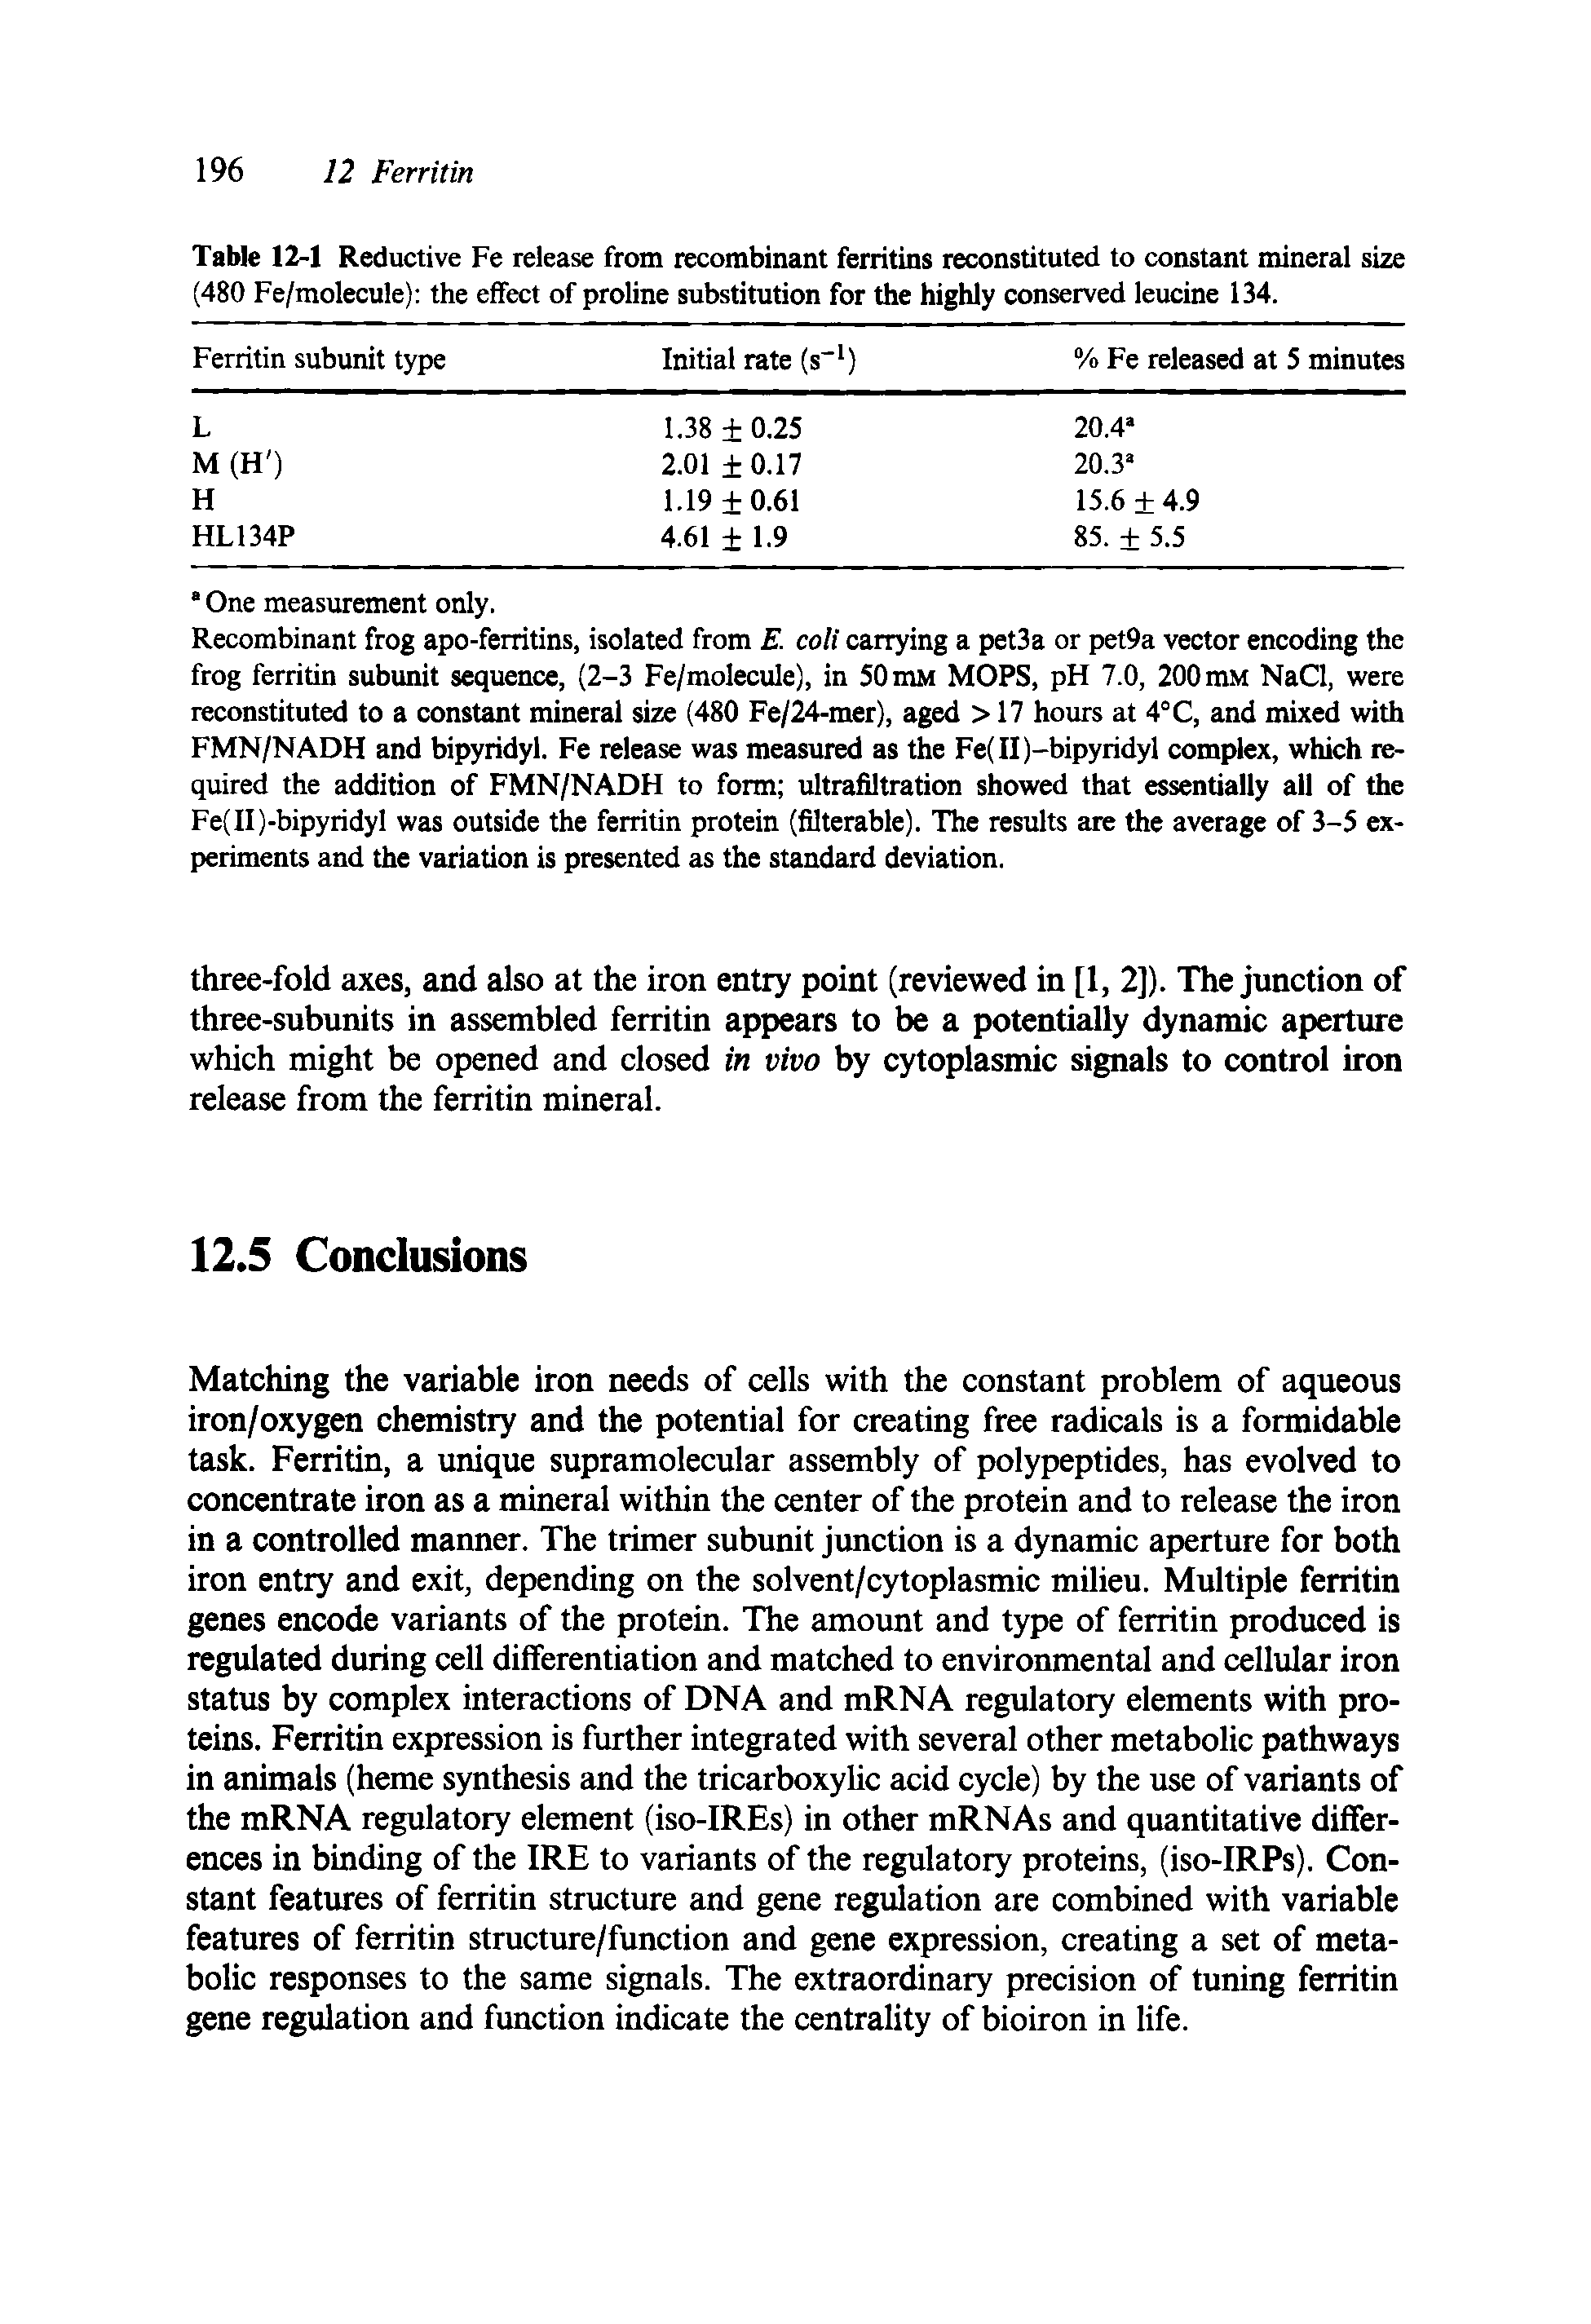 Table 12-1 Reductive Fe release from recombinant ferritins reconstituted to constant mineral size (480 Fe/molecule) the effect of proline substitution for the highly conserved leucine 134.